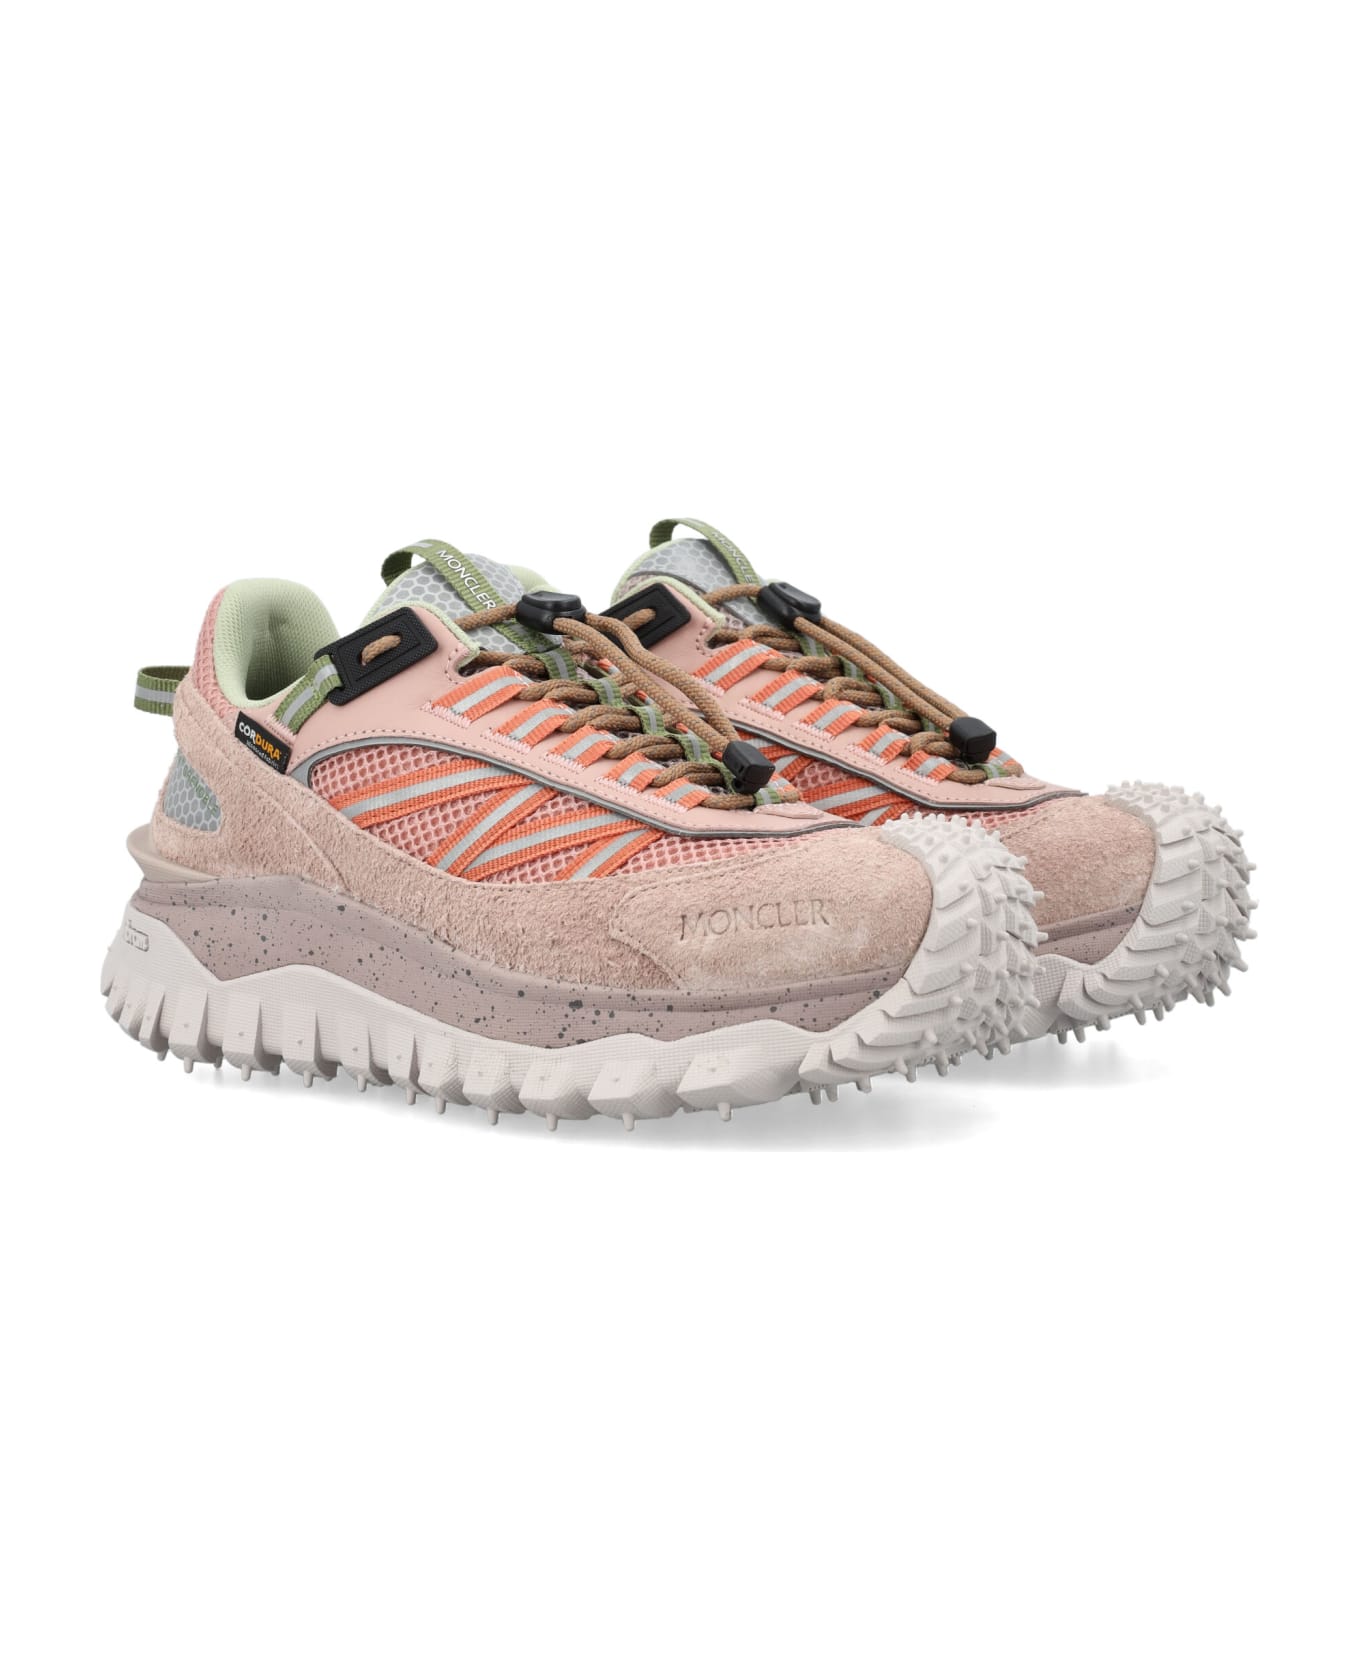 Moncler Trailgrip Trainers - PINK スニーカー